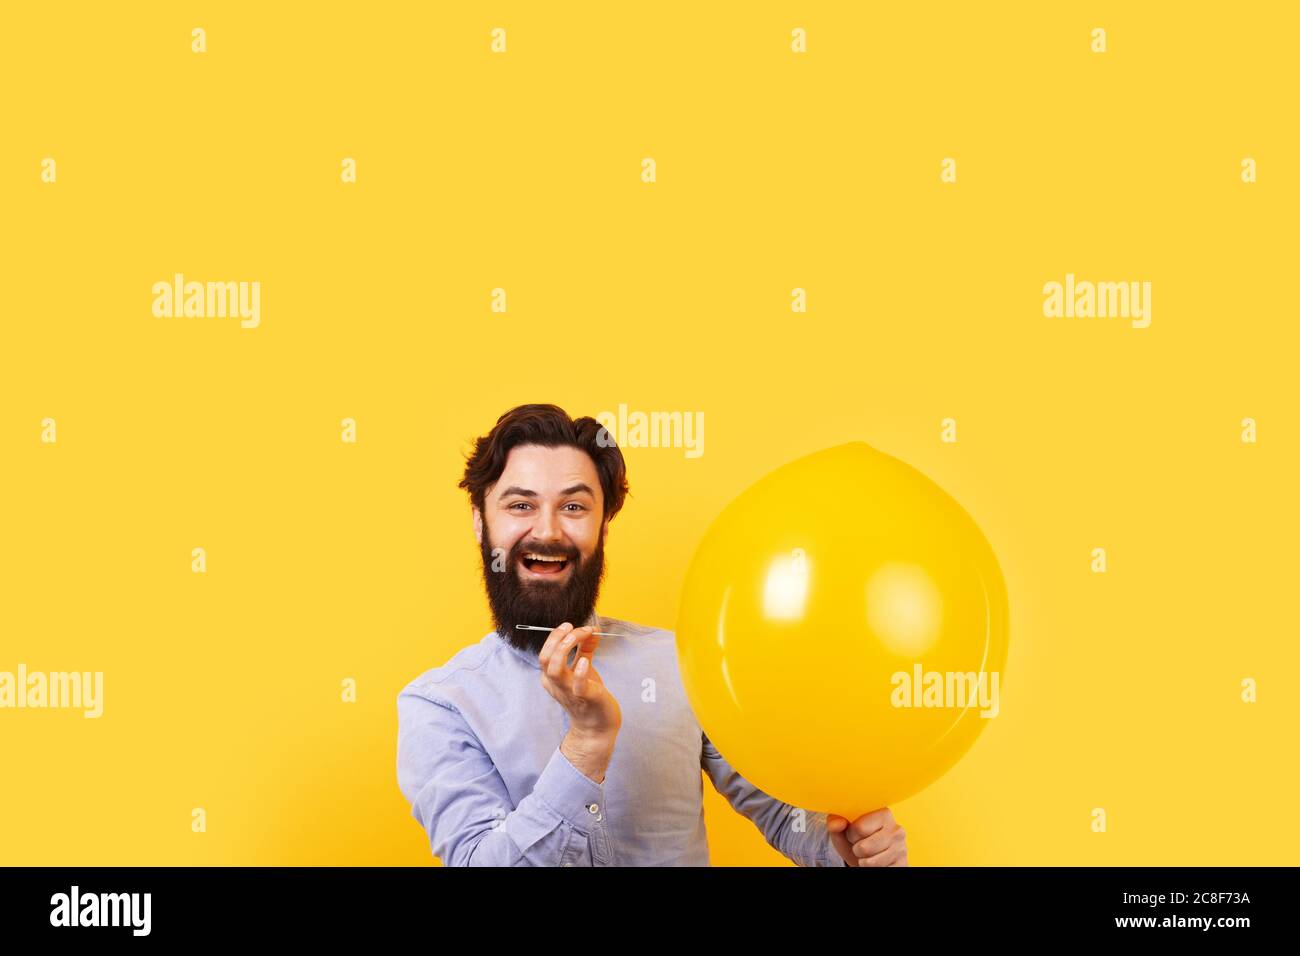 Man holding needle over yellow air balloon, a moment before bubble burst. Stock Photo